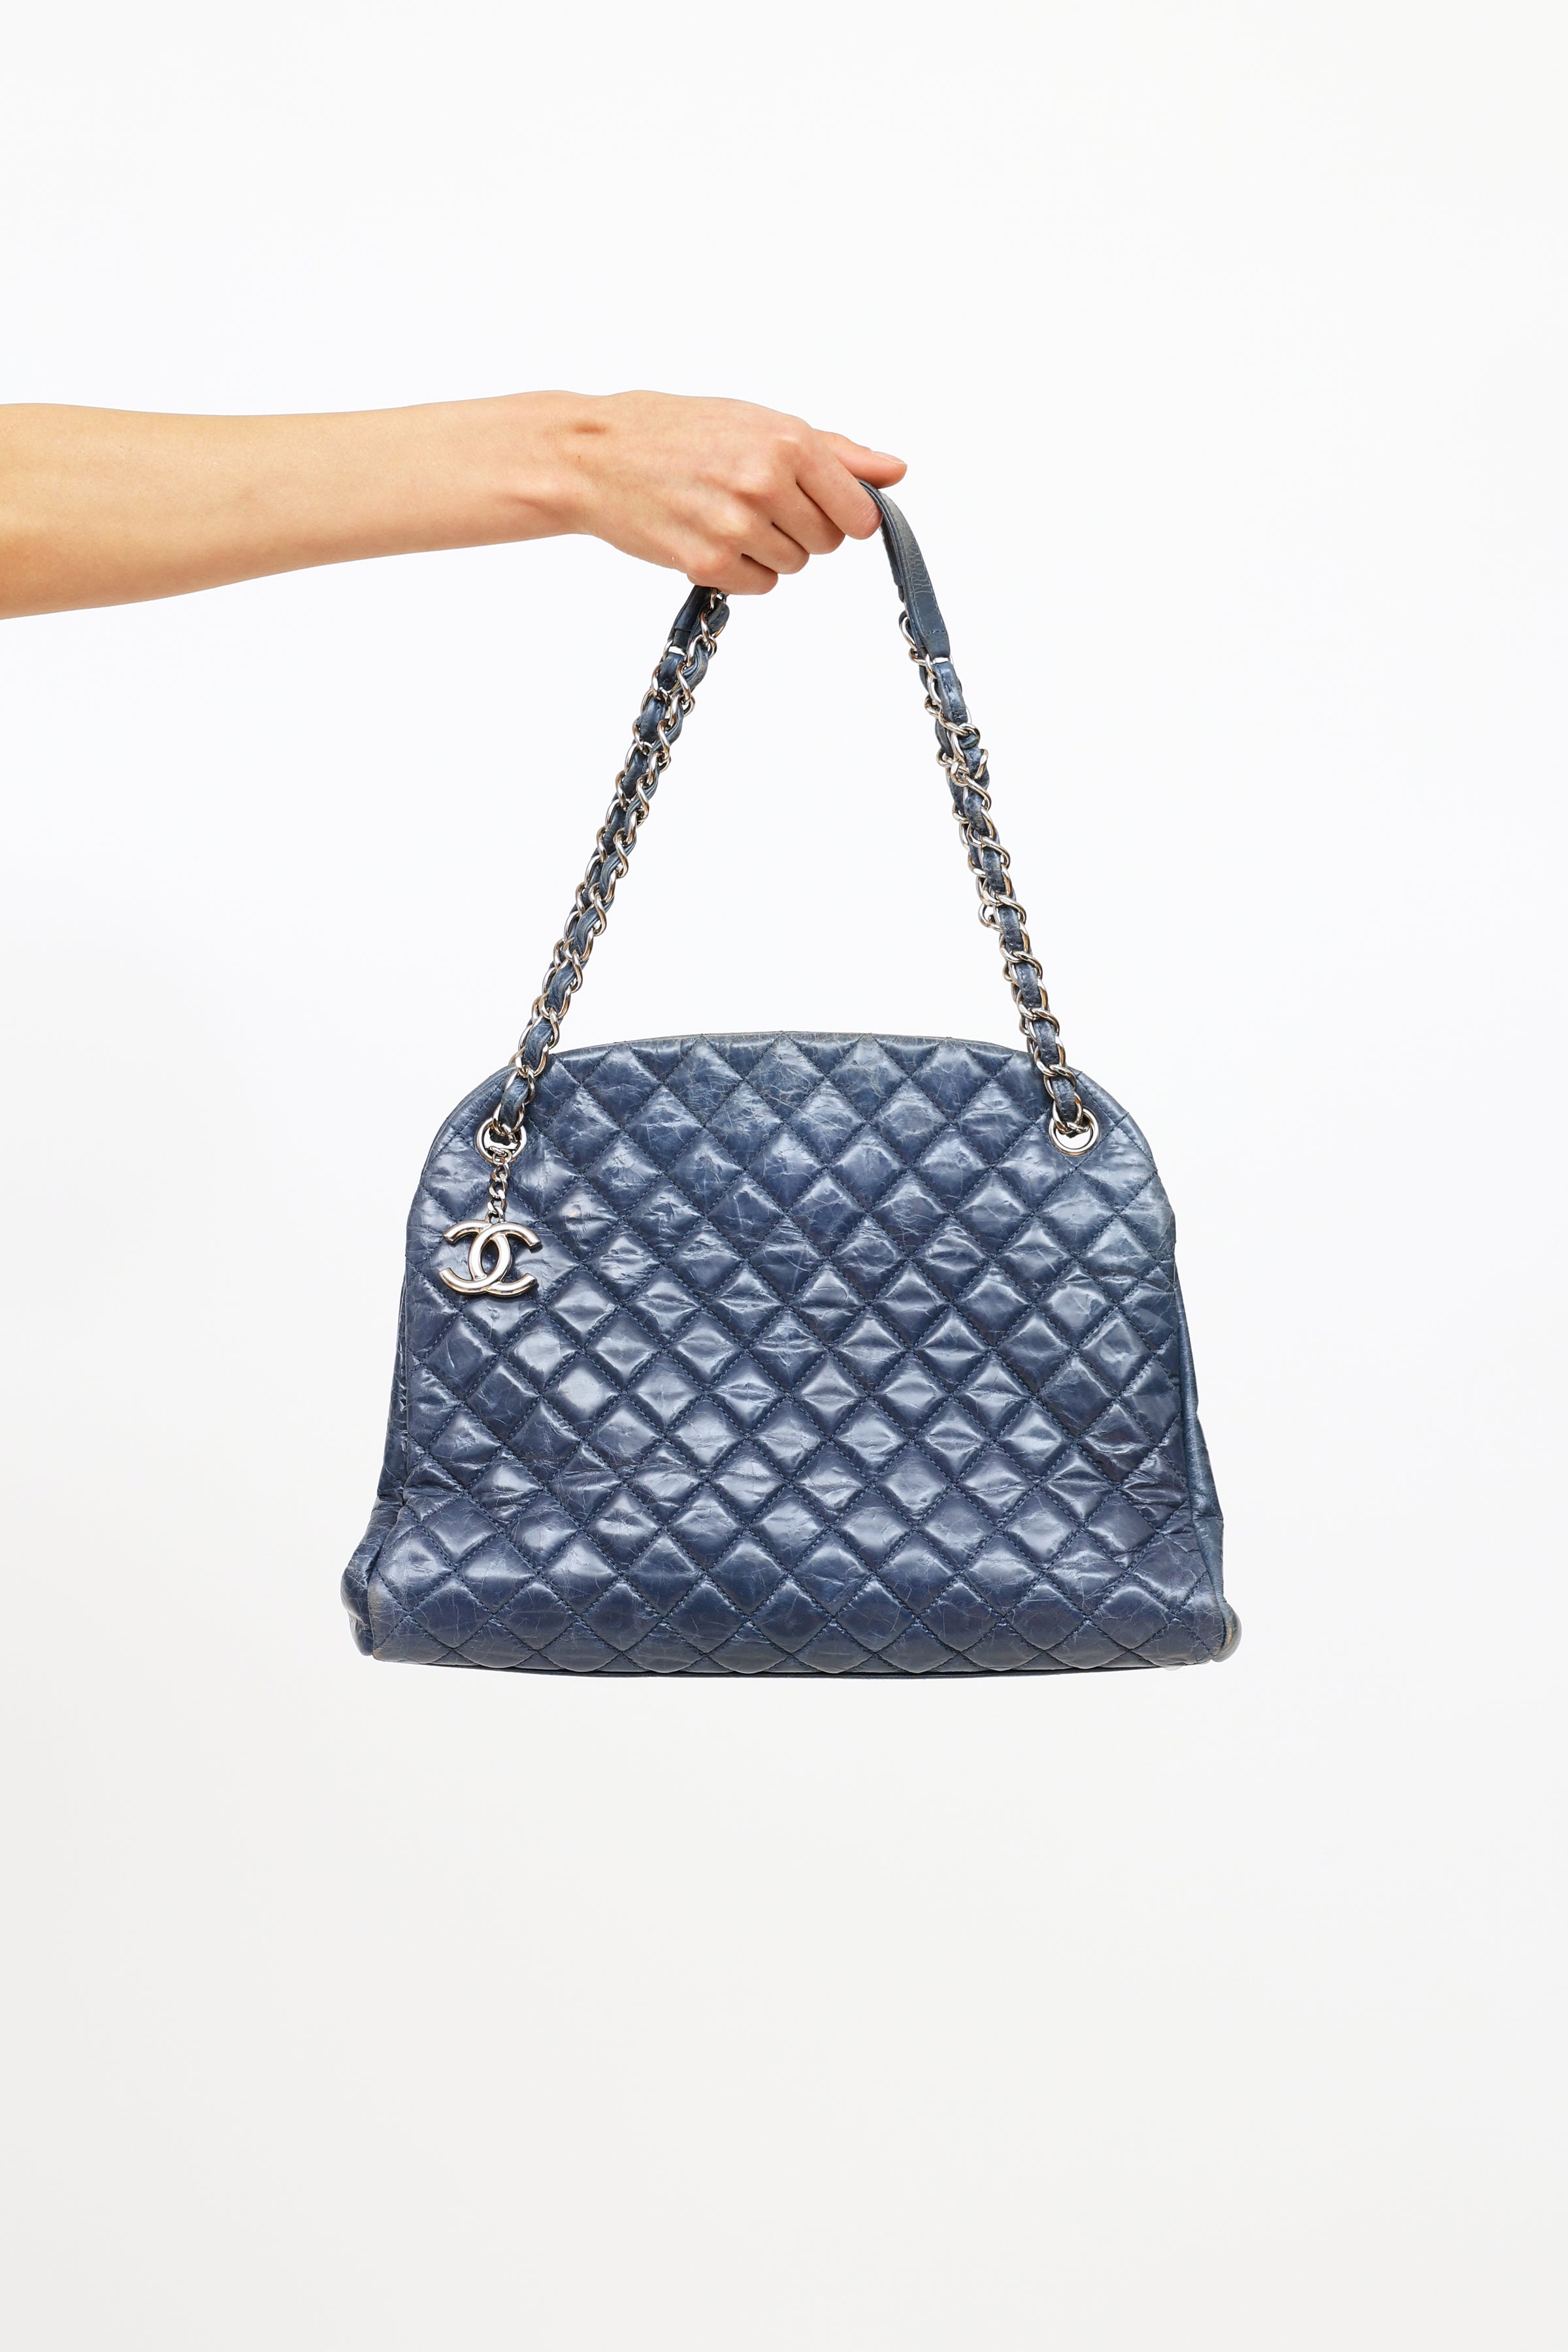 Chanel // 2011 Blue Leather Mademoiselle Bowler Bag – VSP Consignment